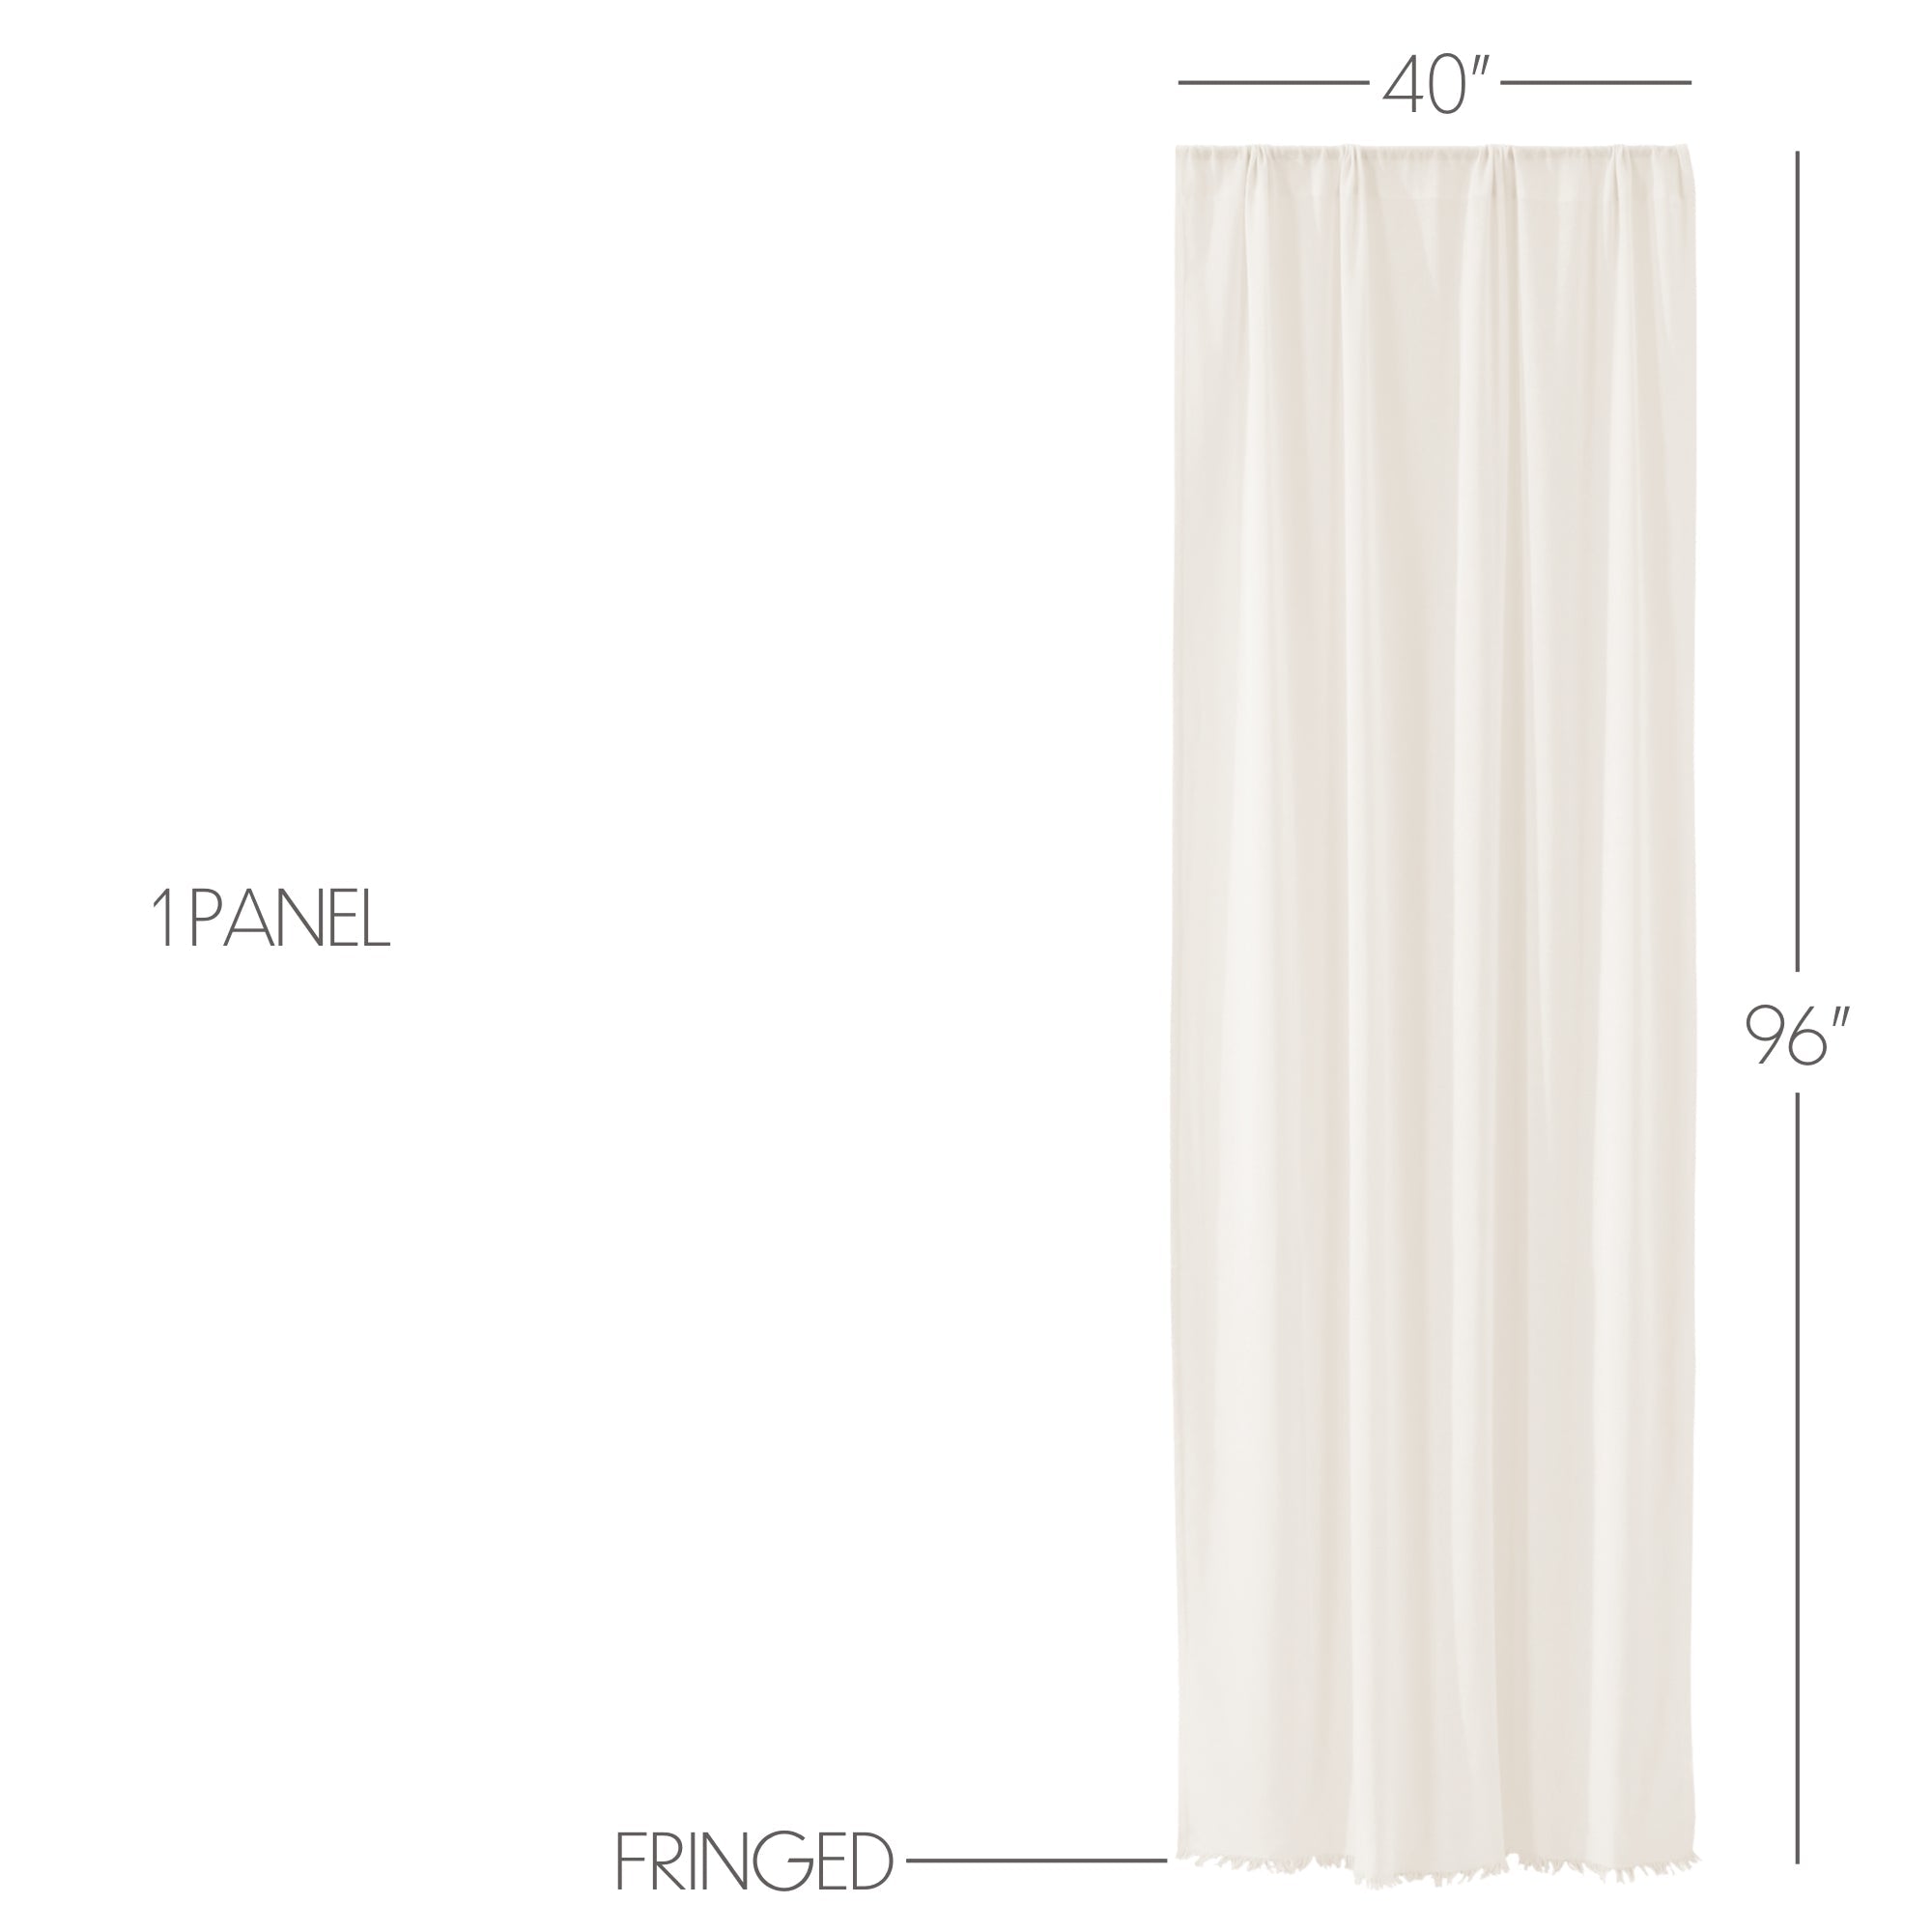 Tobacco Cloth Antique White Panel Curtain 96"x40" VHC Brands